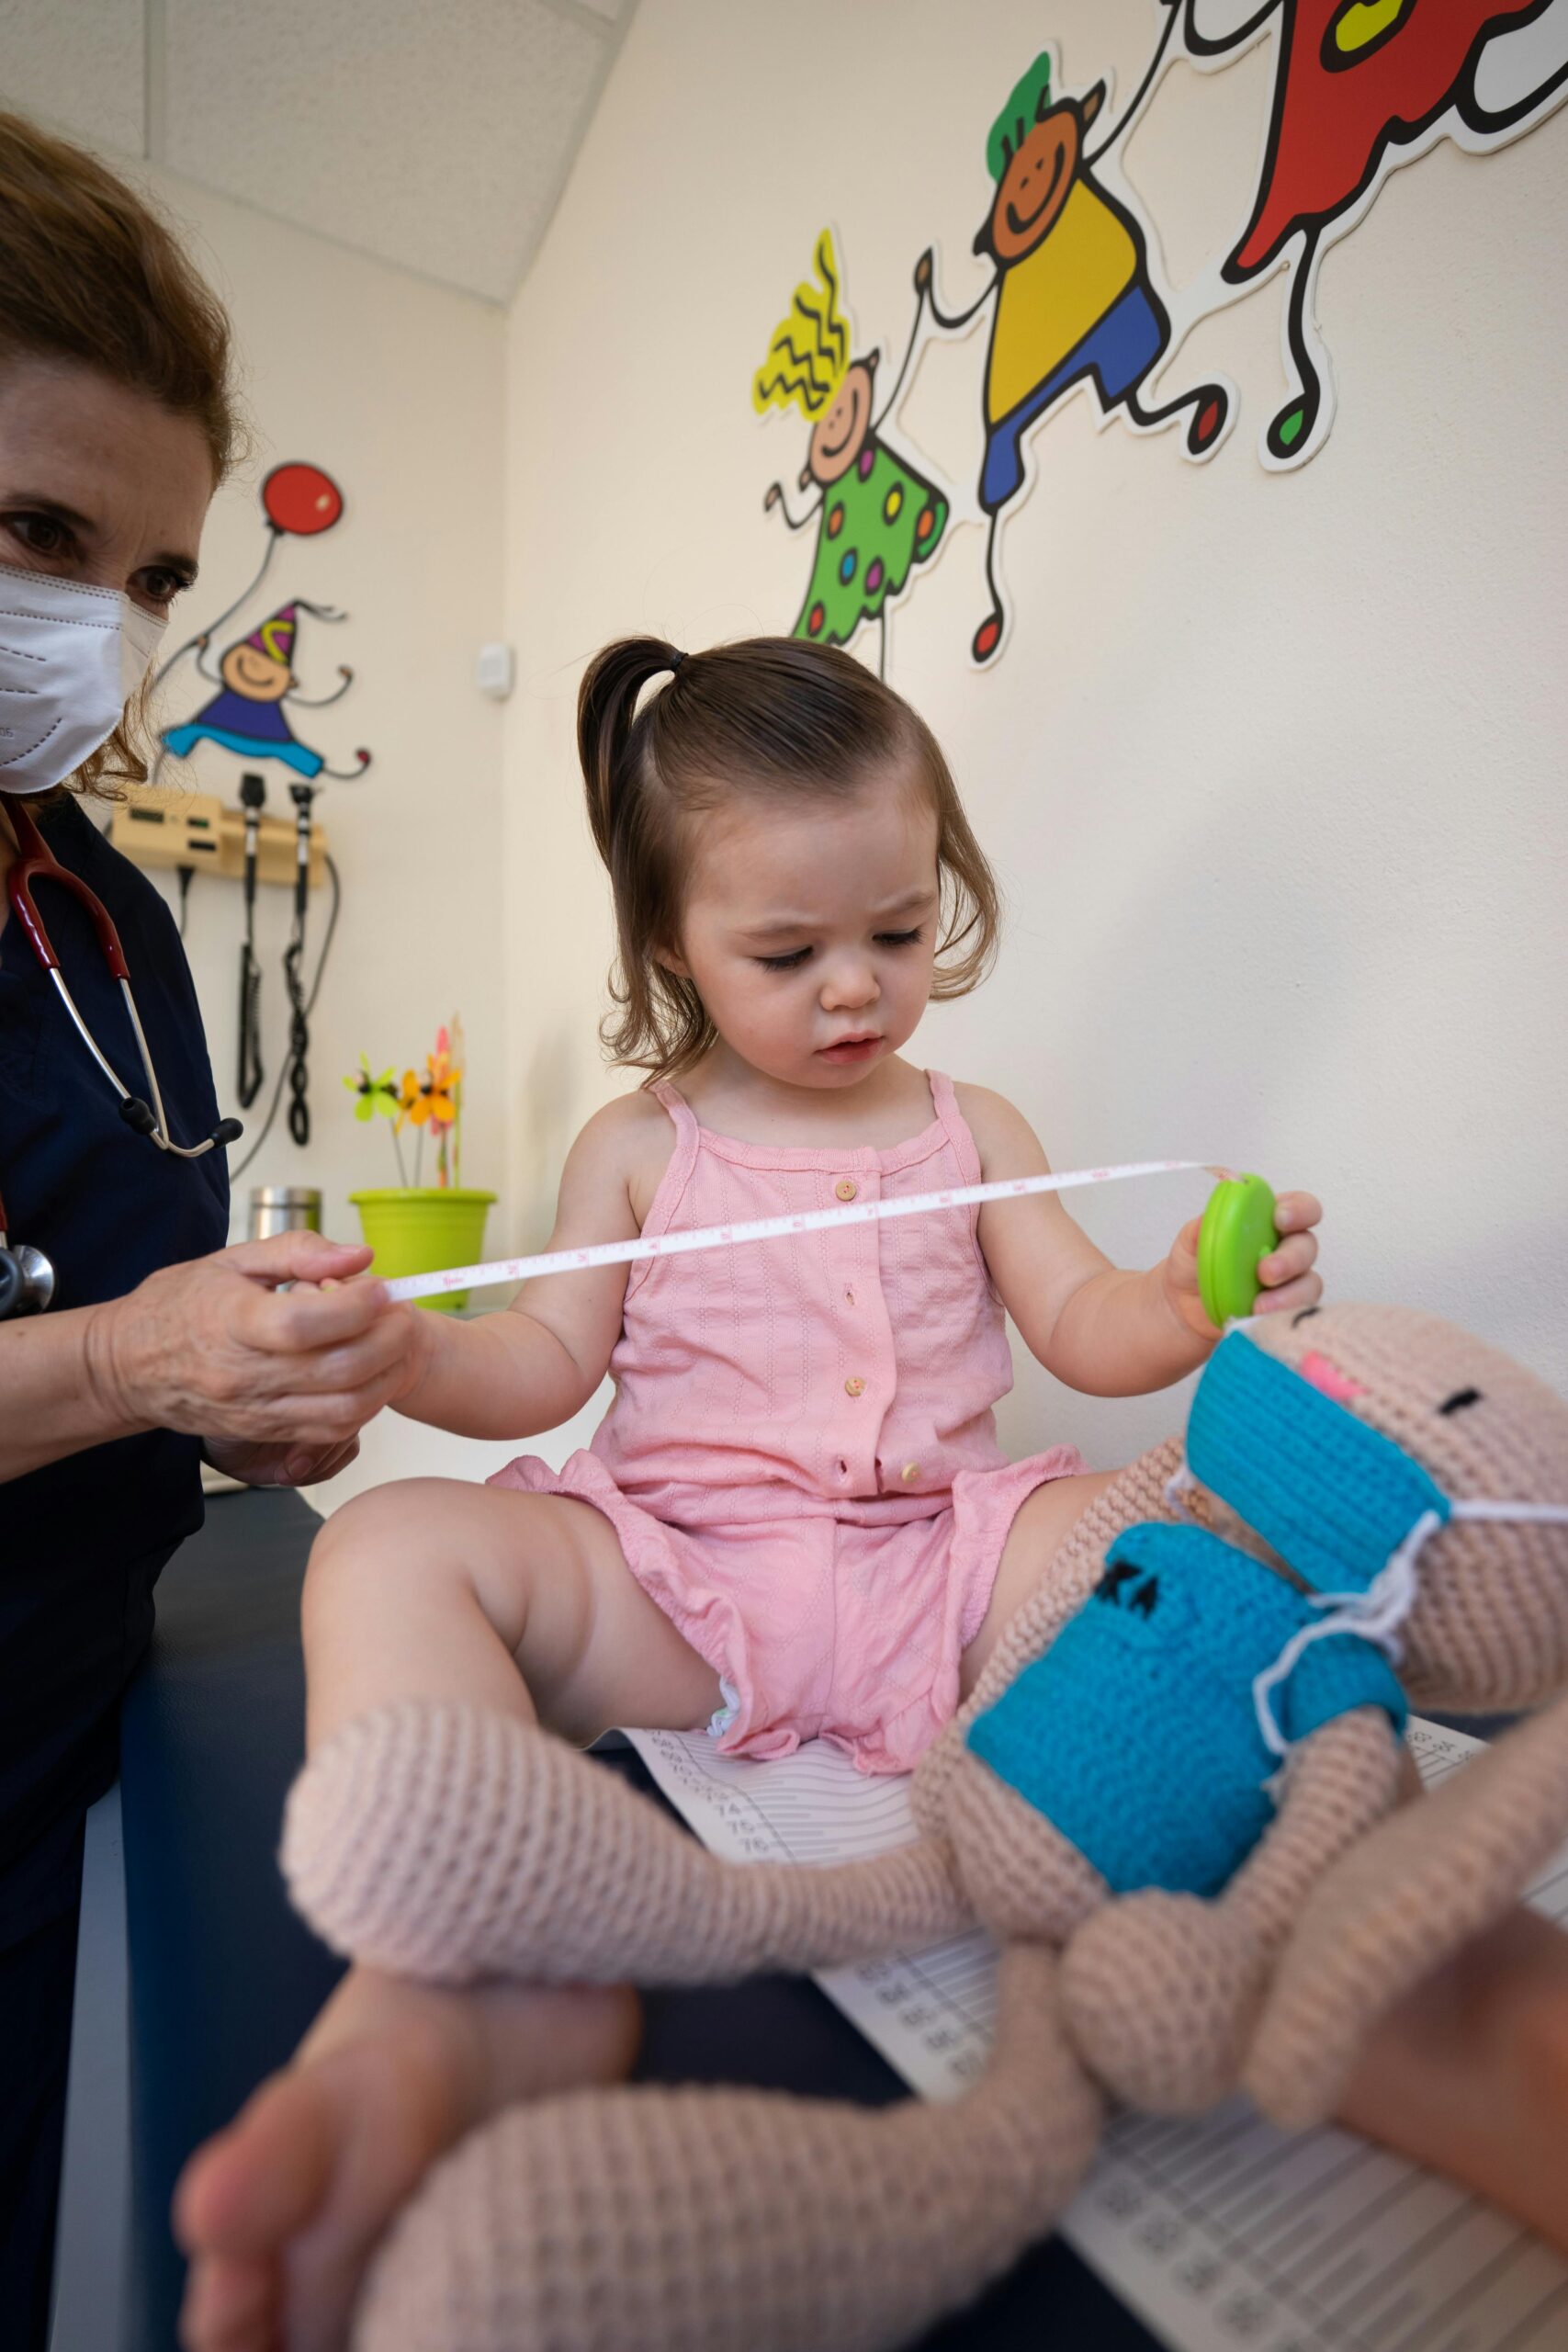 Should I have health insurance for my kids?